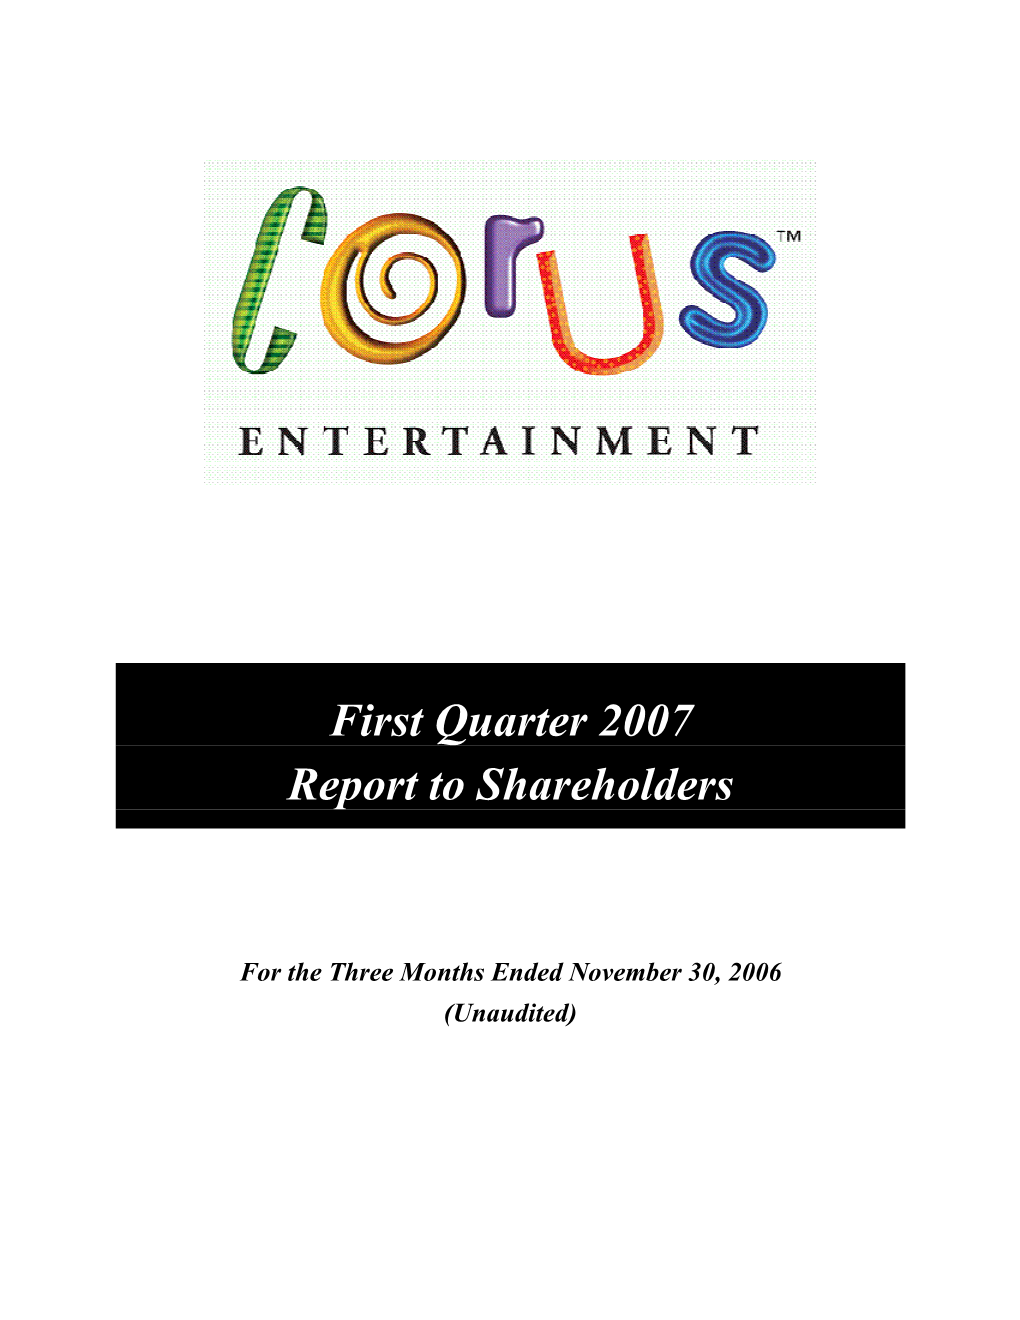 First Quarter 2007 Report to Shareholders